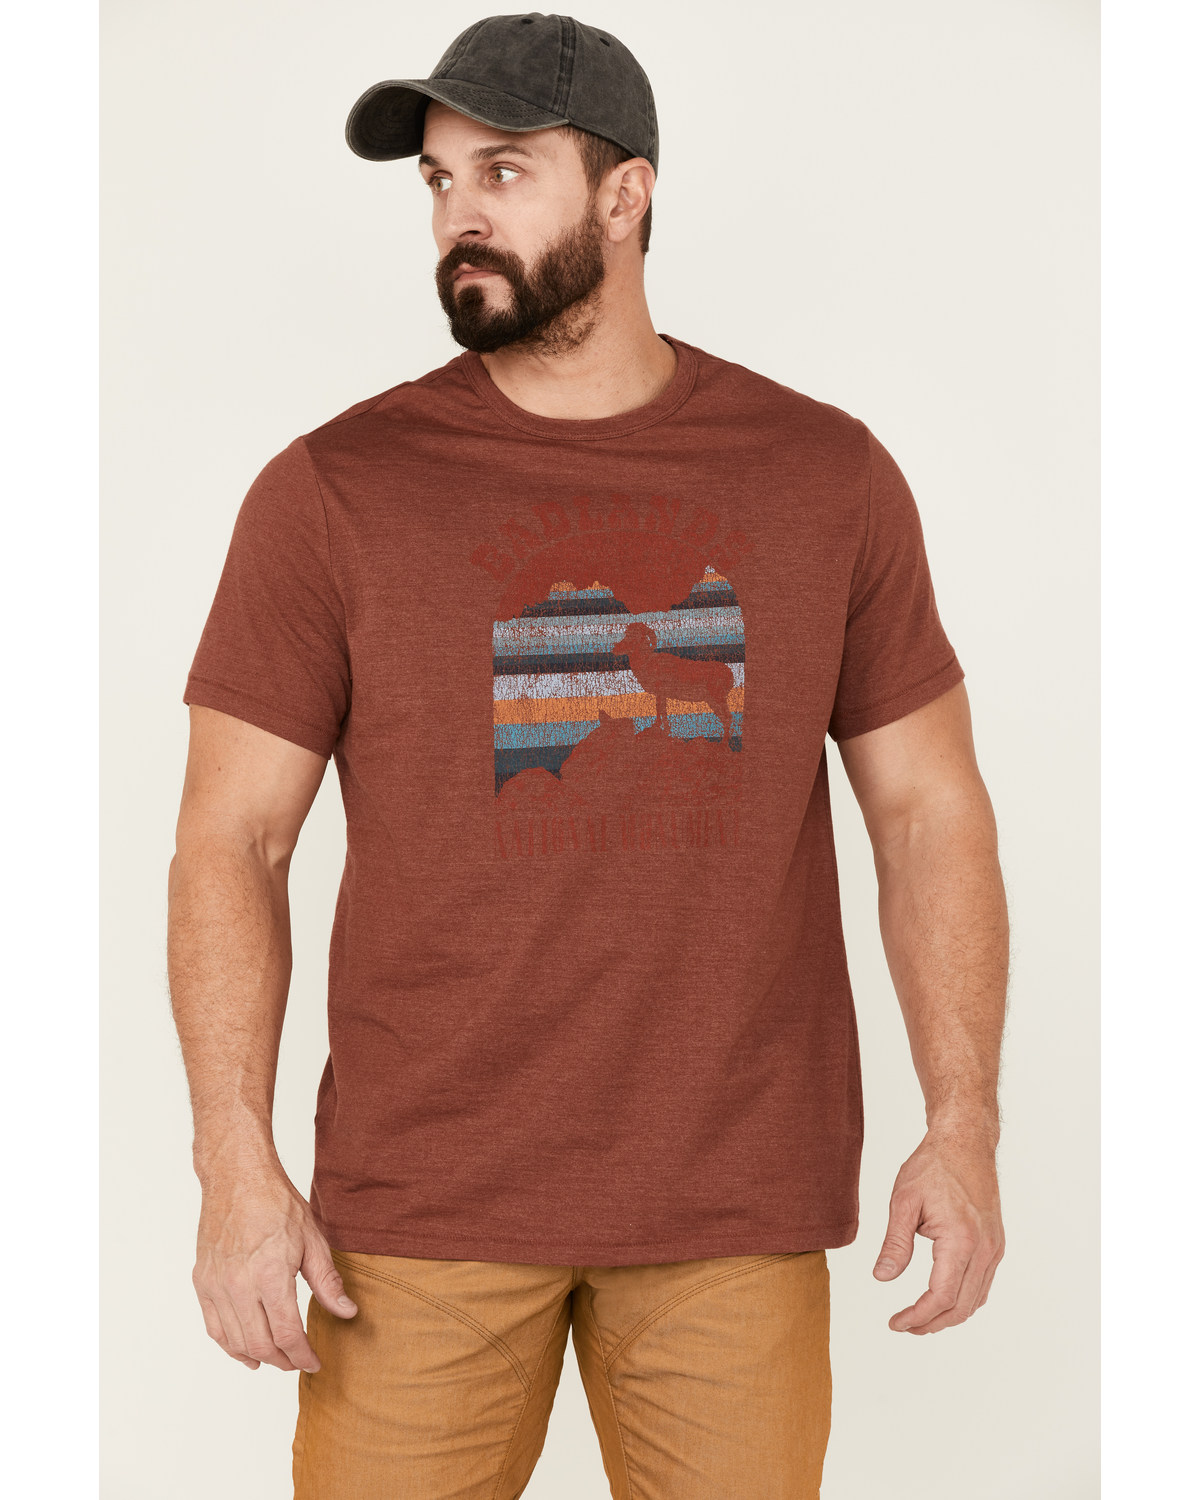 Brothers and Sons Men's Badlands National Monument Graphic Red Short Sleeve T-Shirt